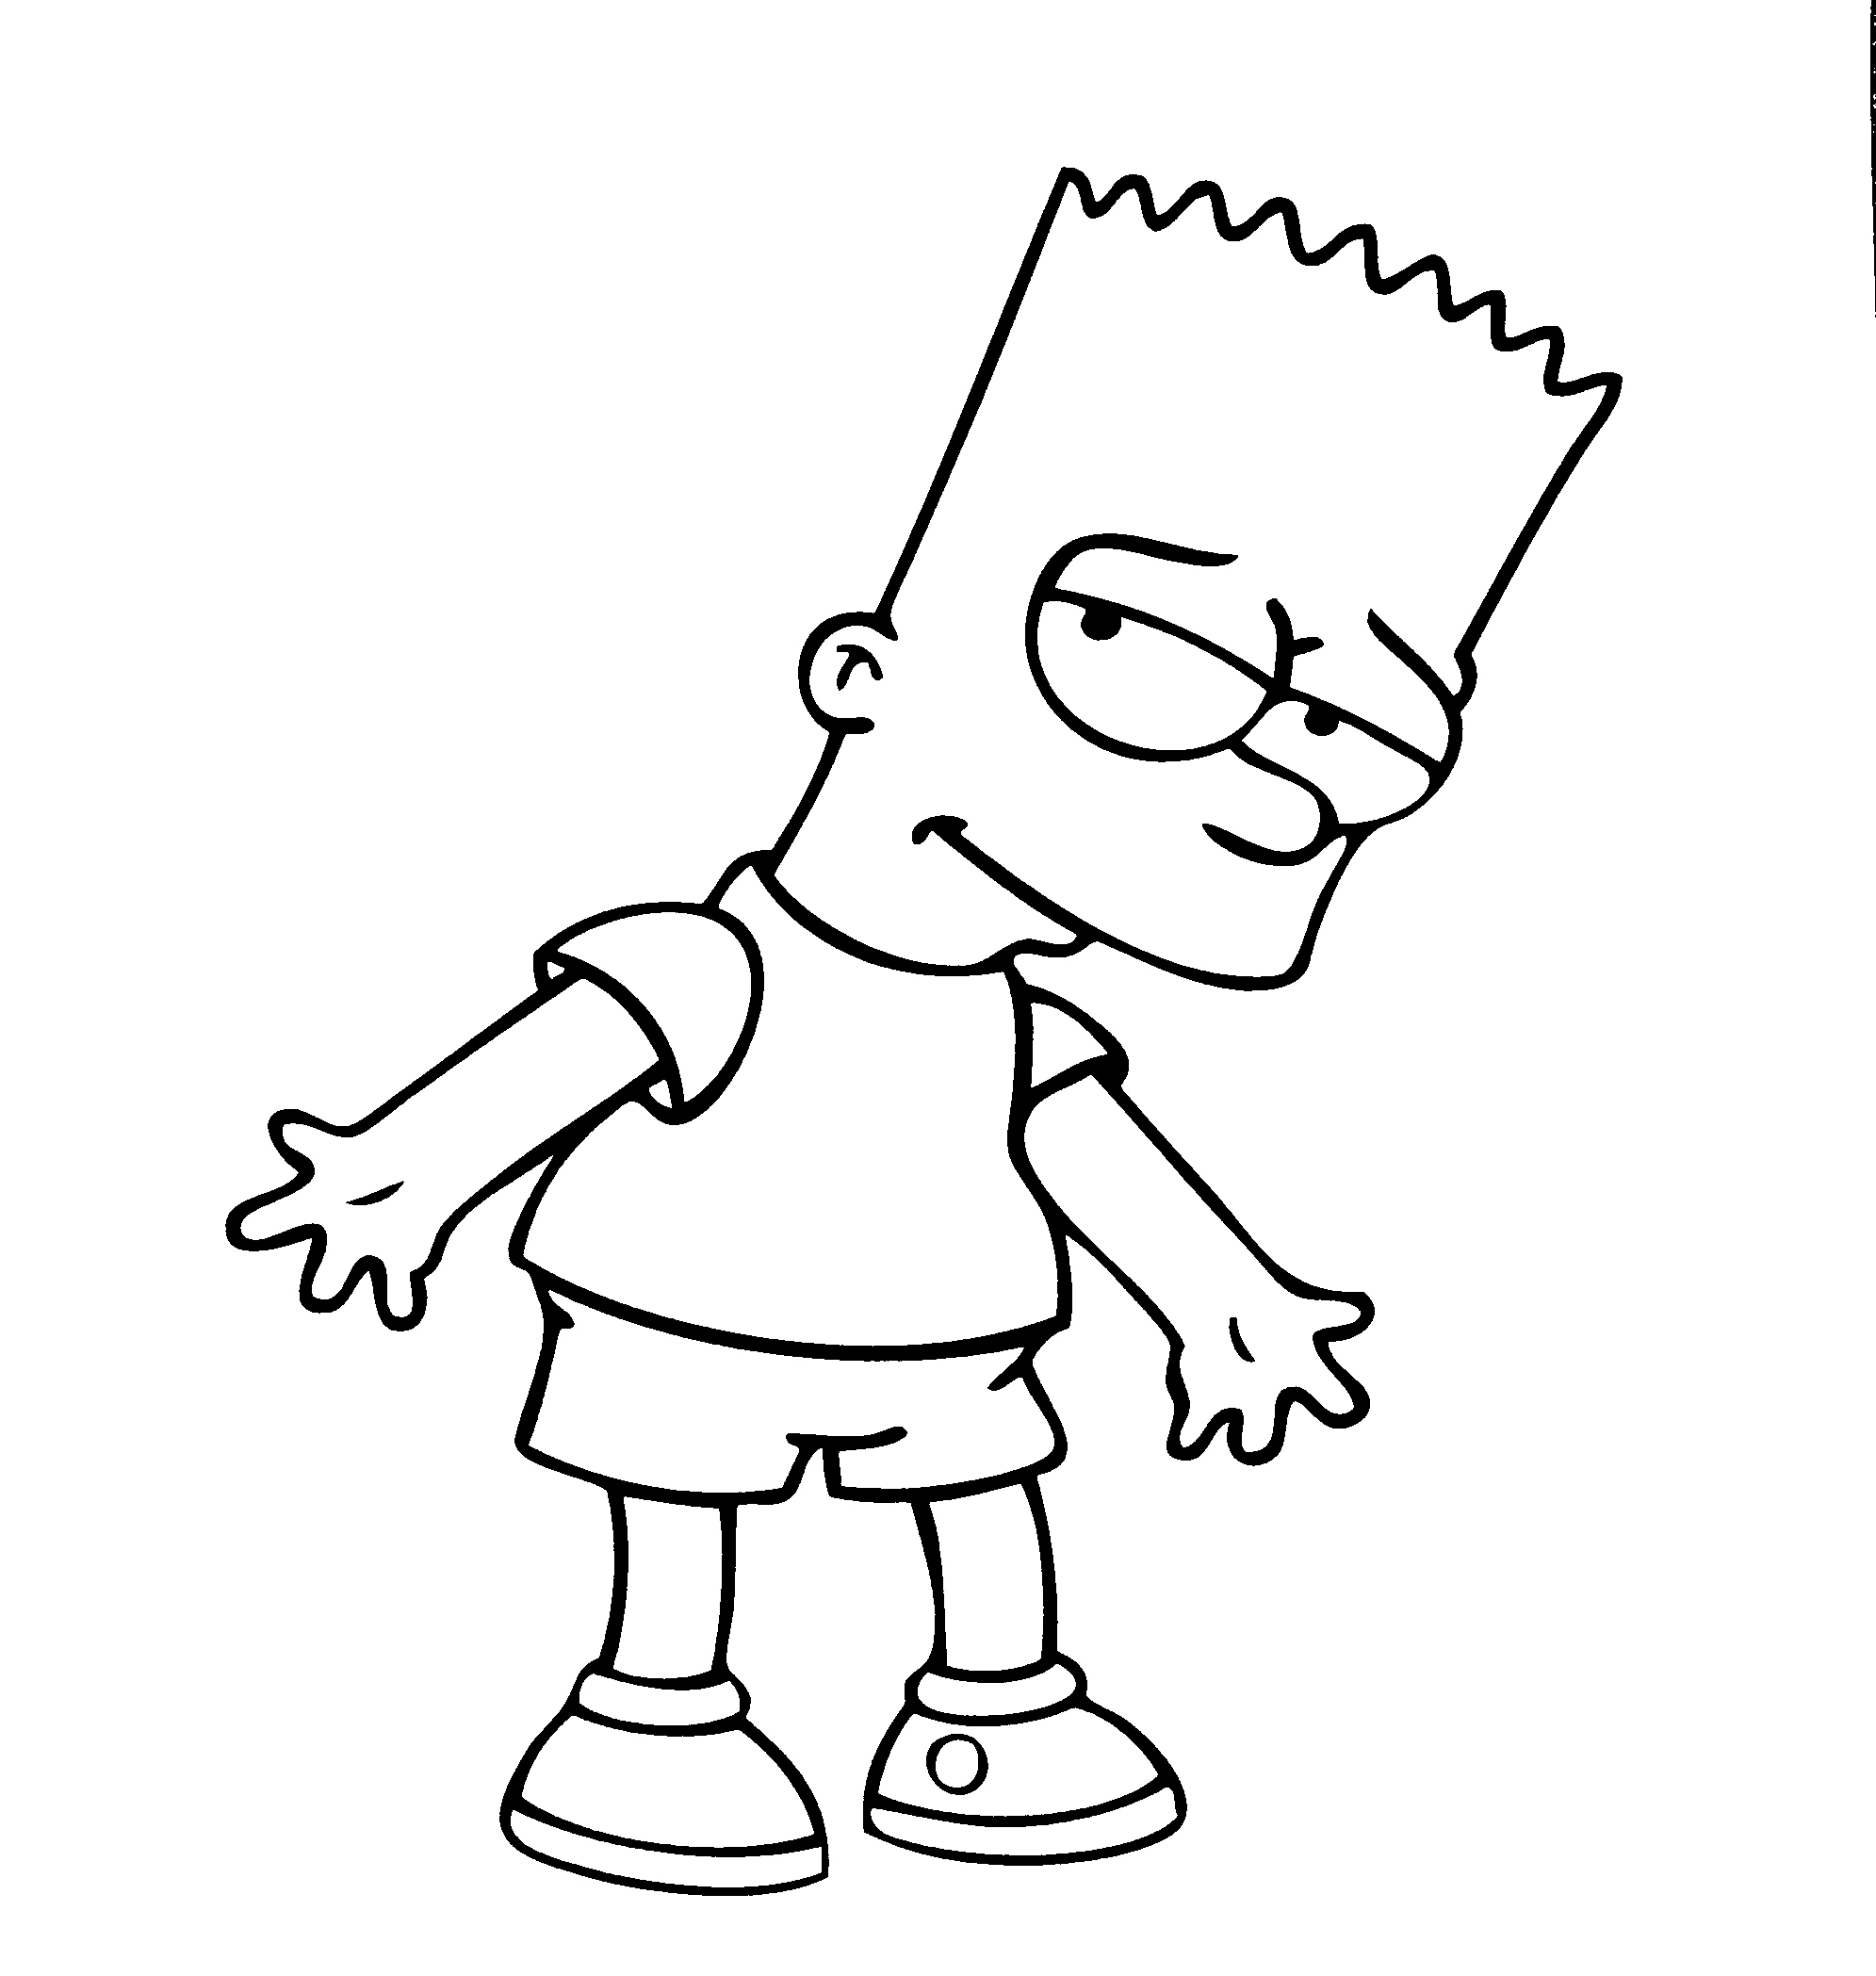 How to Draw Bart Simpson: A Fun and Creative Guide - Bestfashi